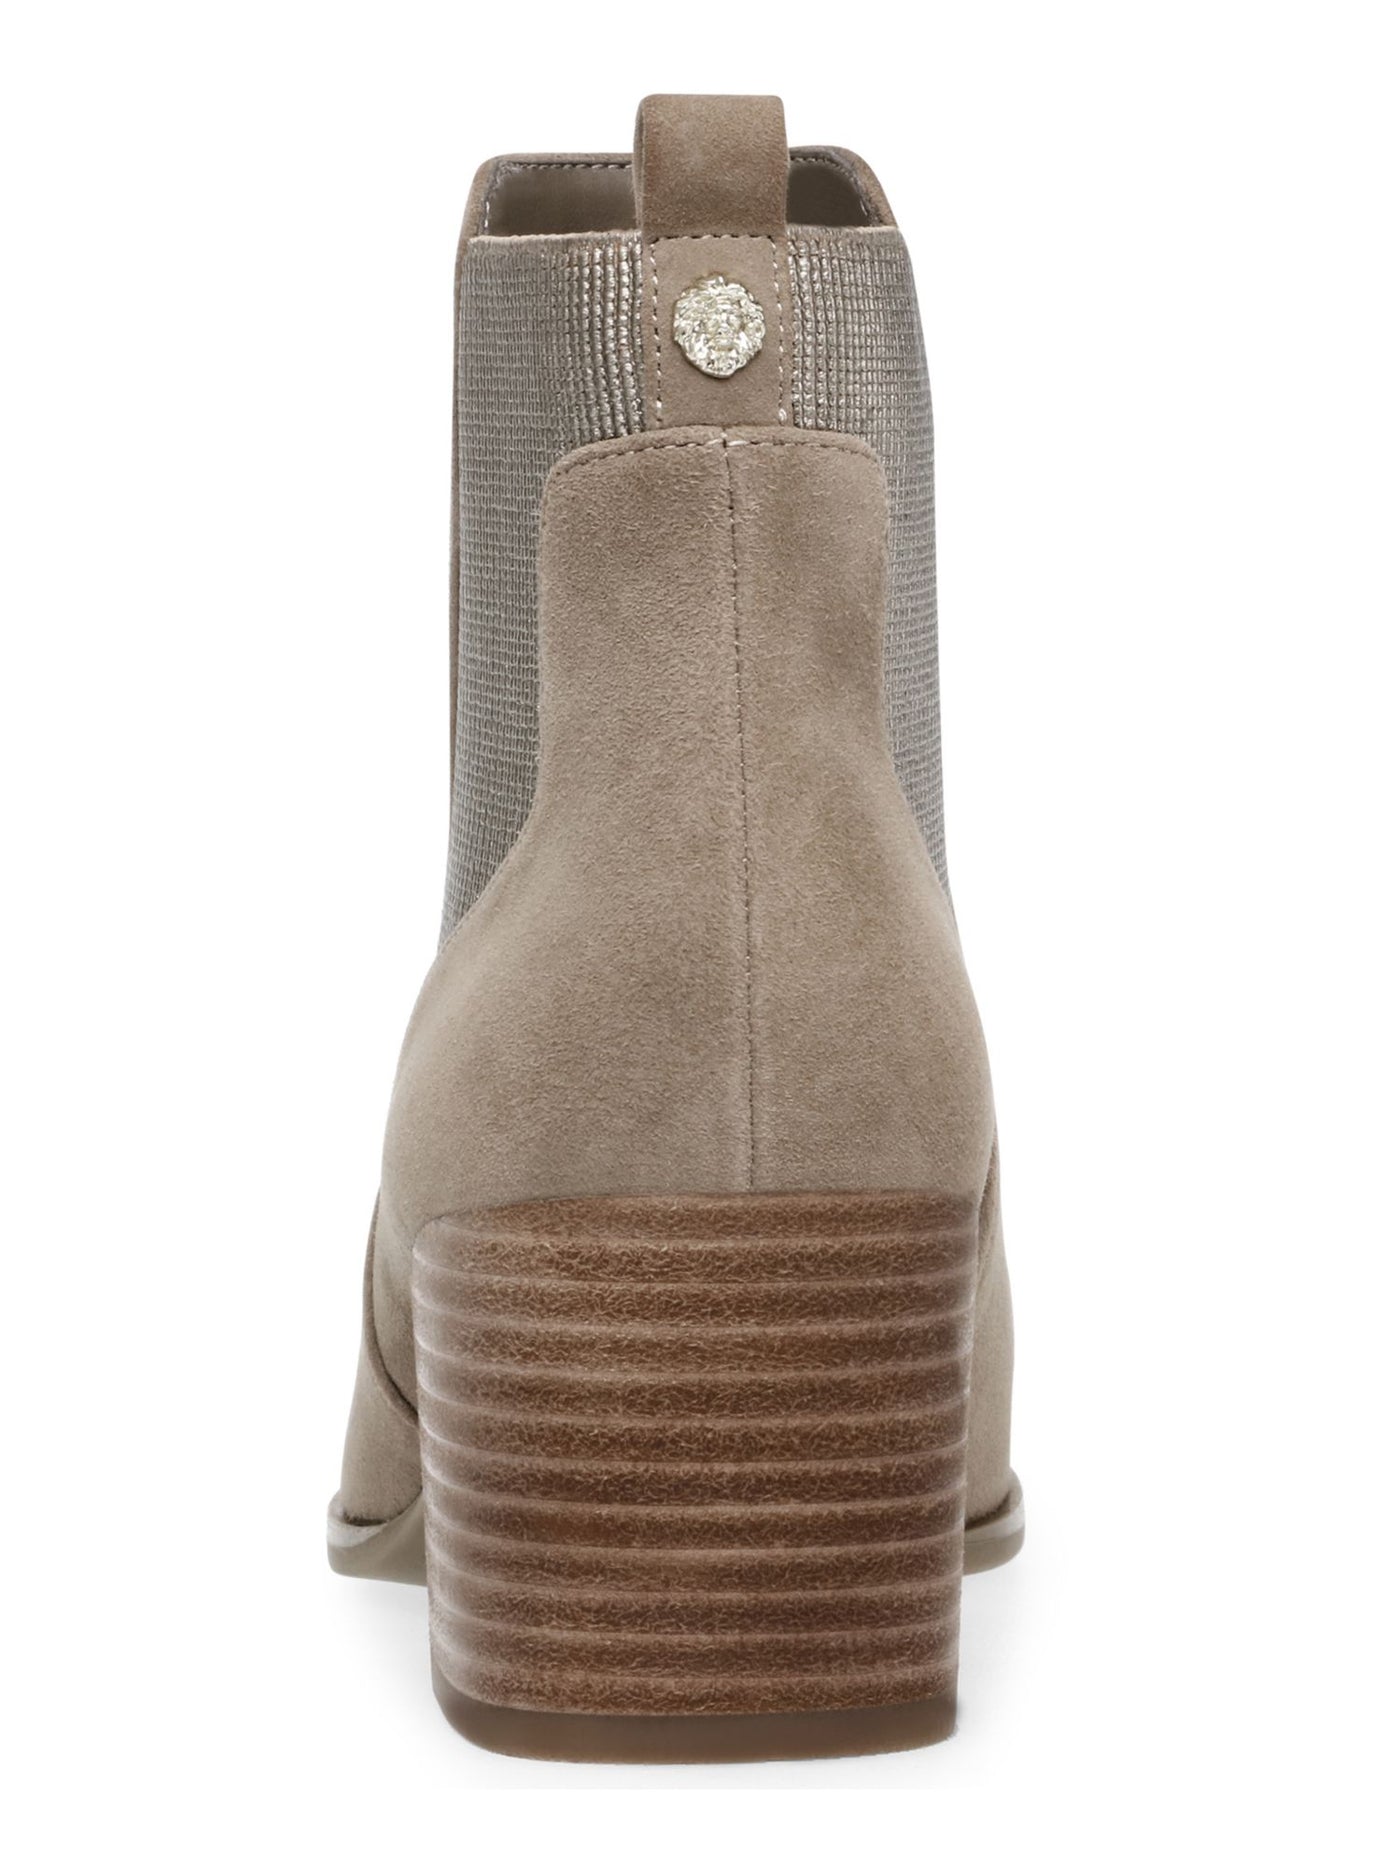 ANNE KLEIN Womens Beige Side Gores Cushioned Parson Almond Toe Stacked Heel Leather Booties 9.5